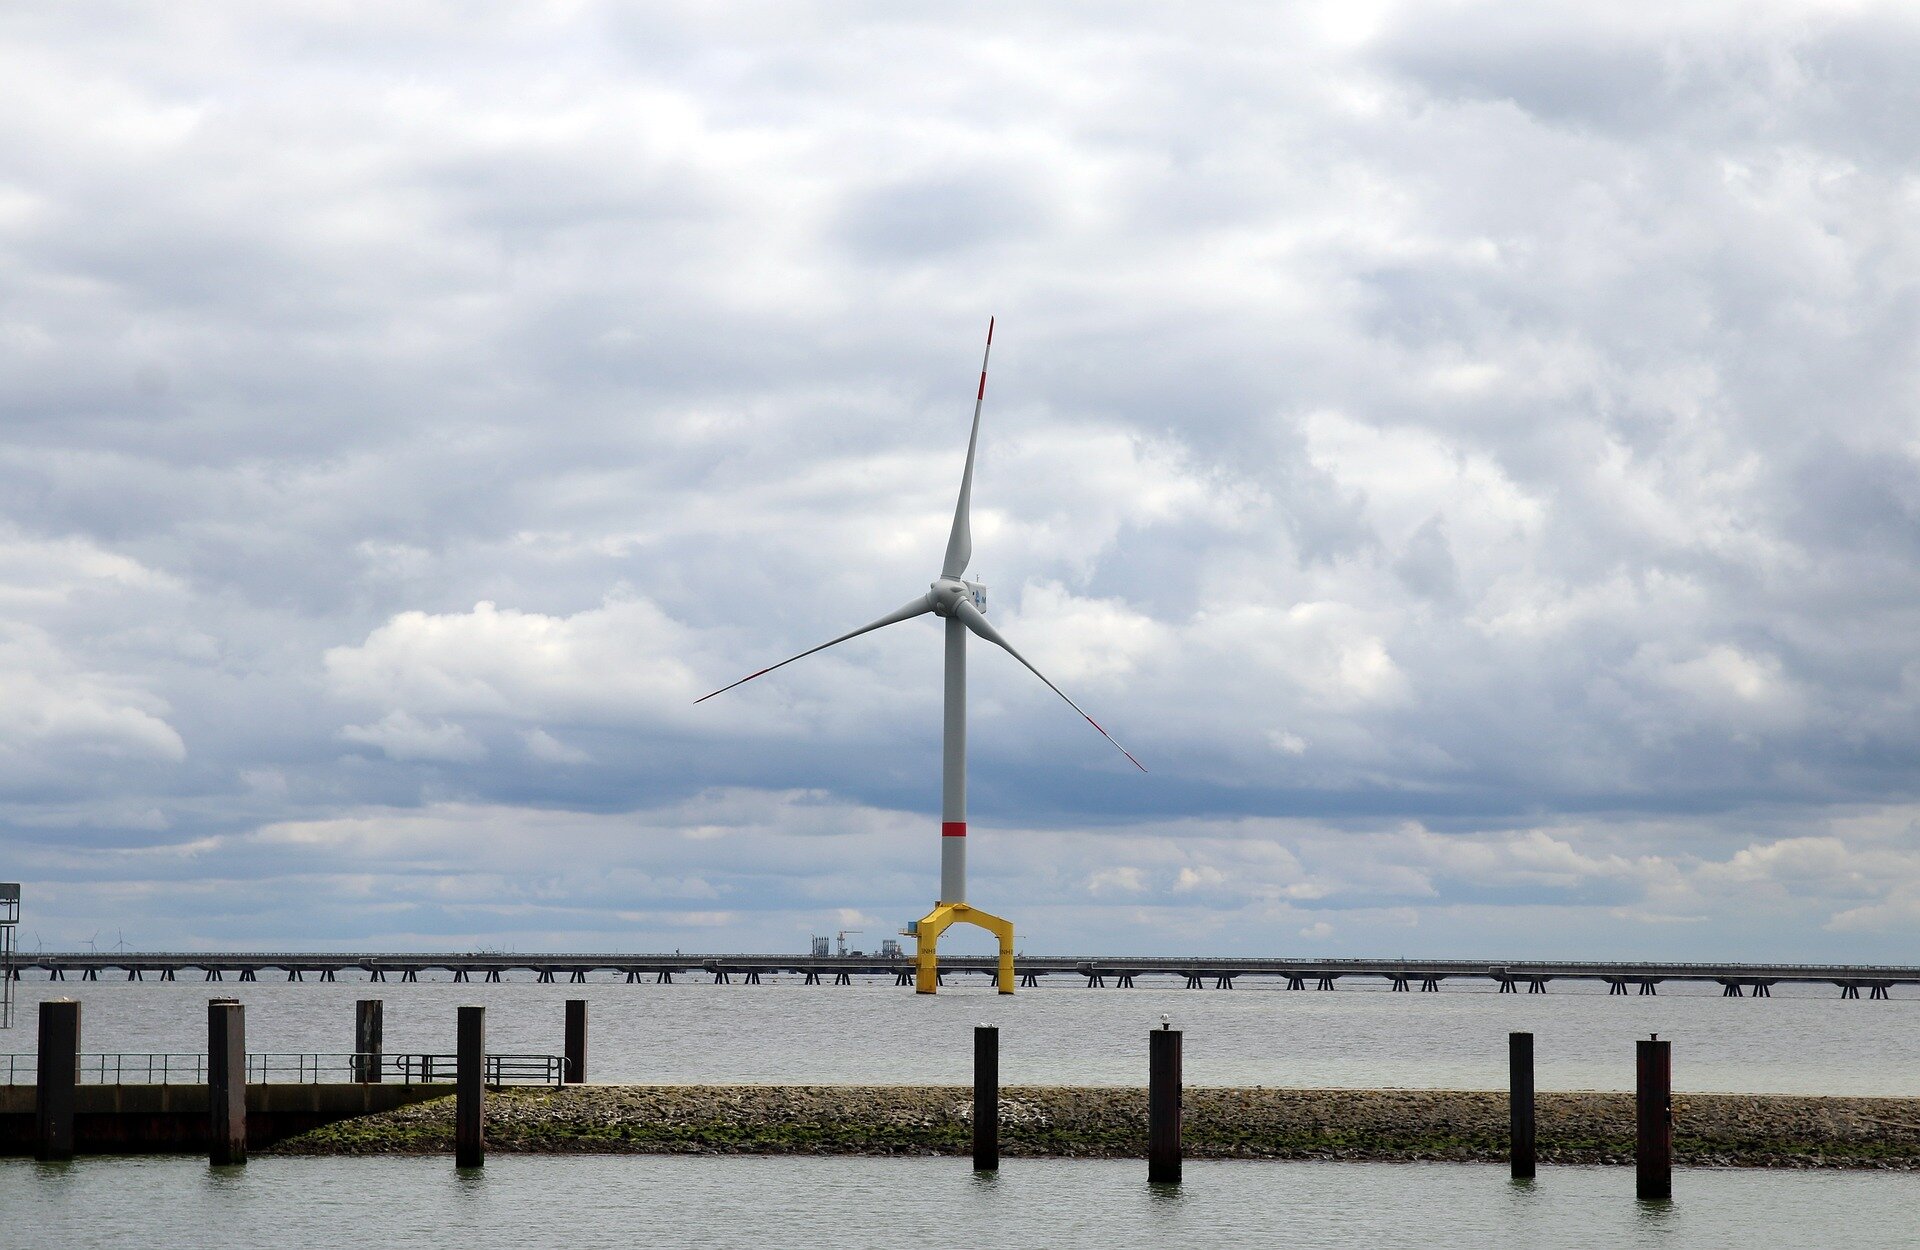 #US ignored own scientists’ warning in backing Atlantic wind farm